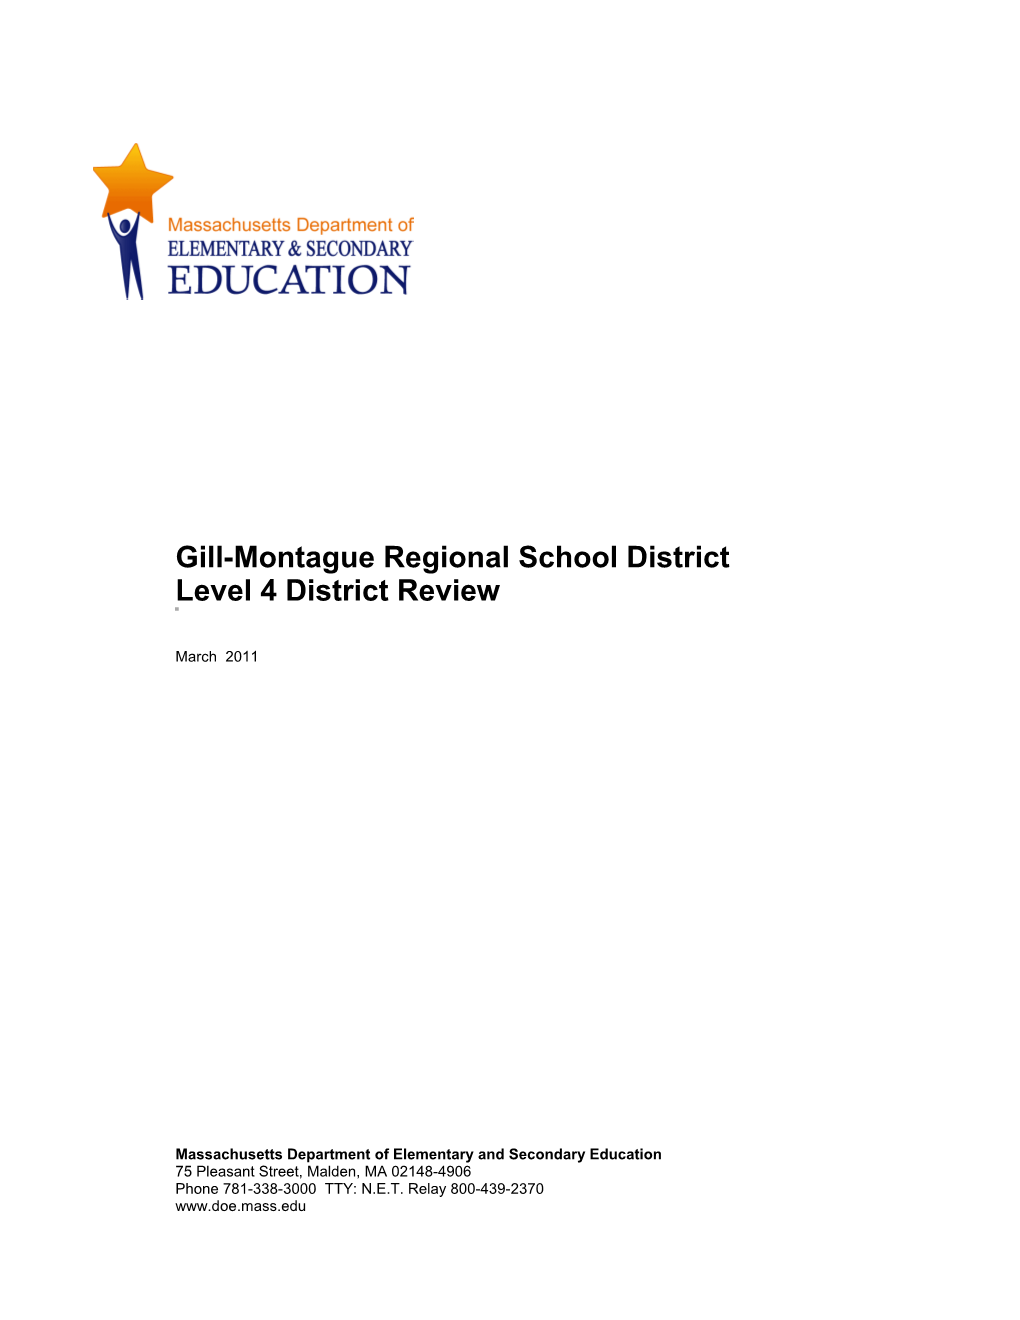 Gill-Montague Regional School District, Level 4 Review Report, March 2011